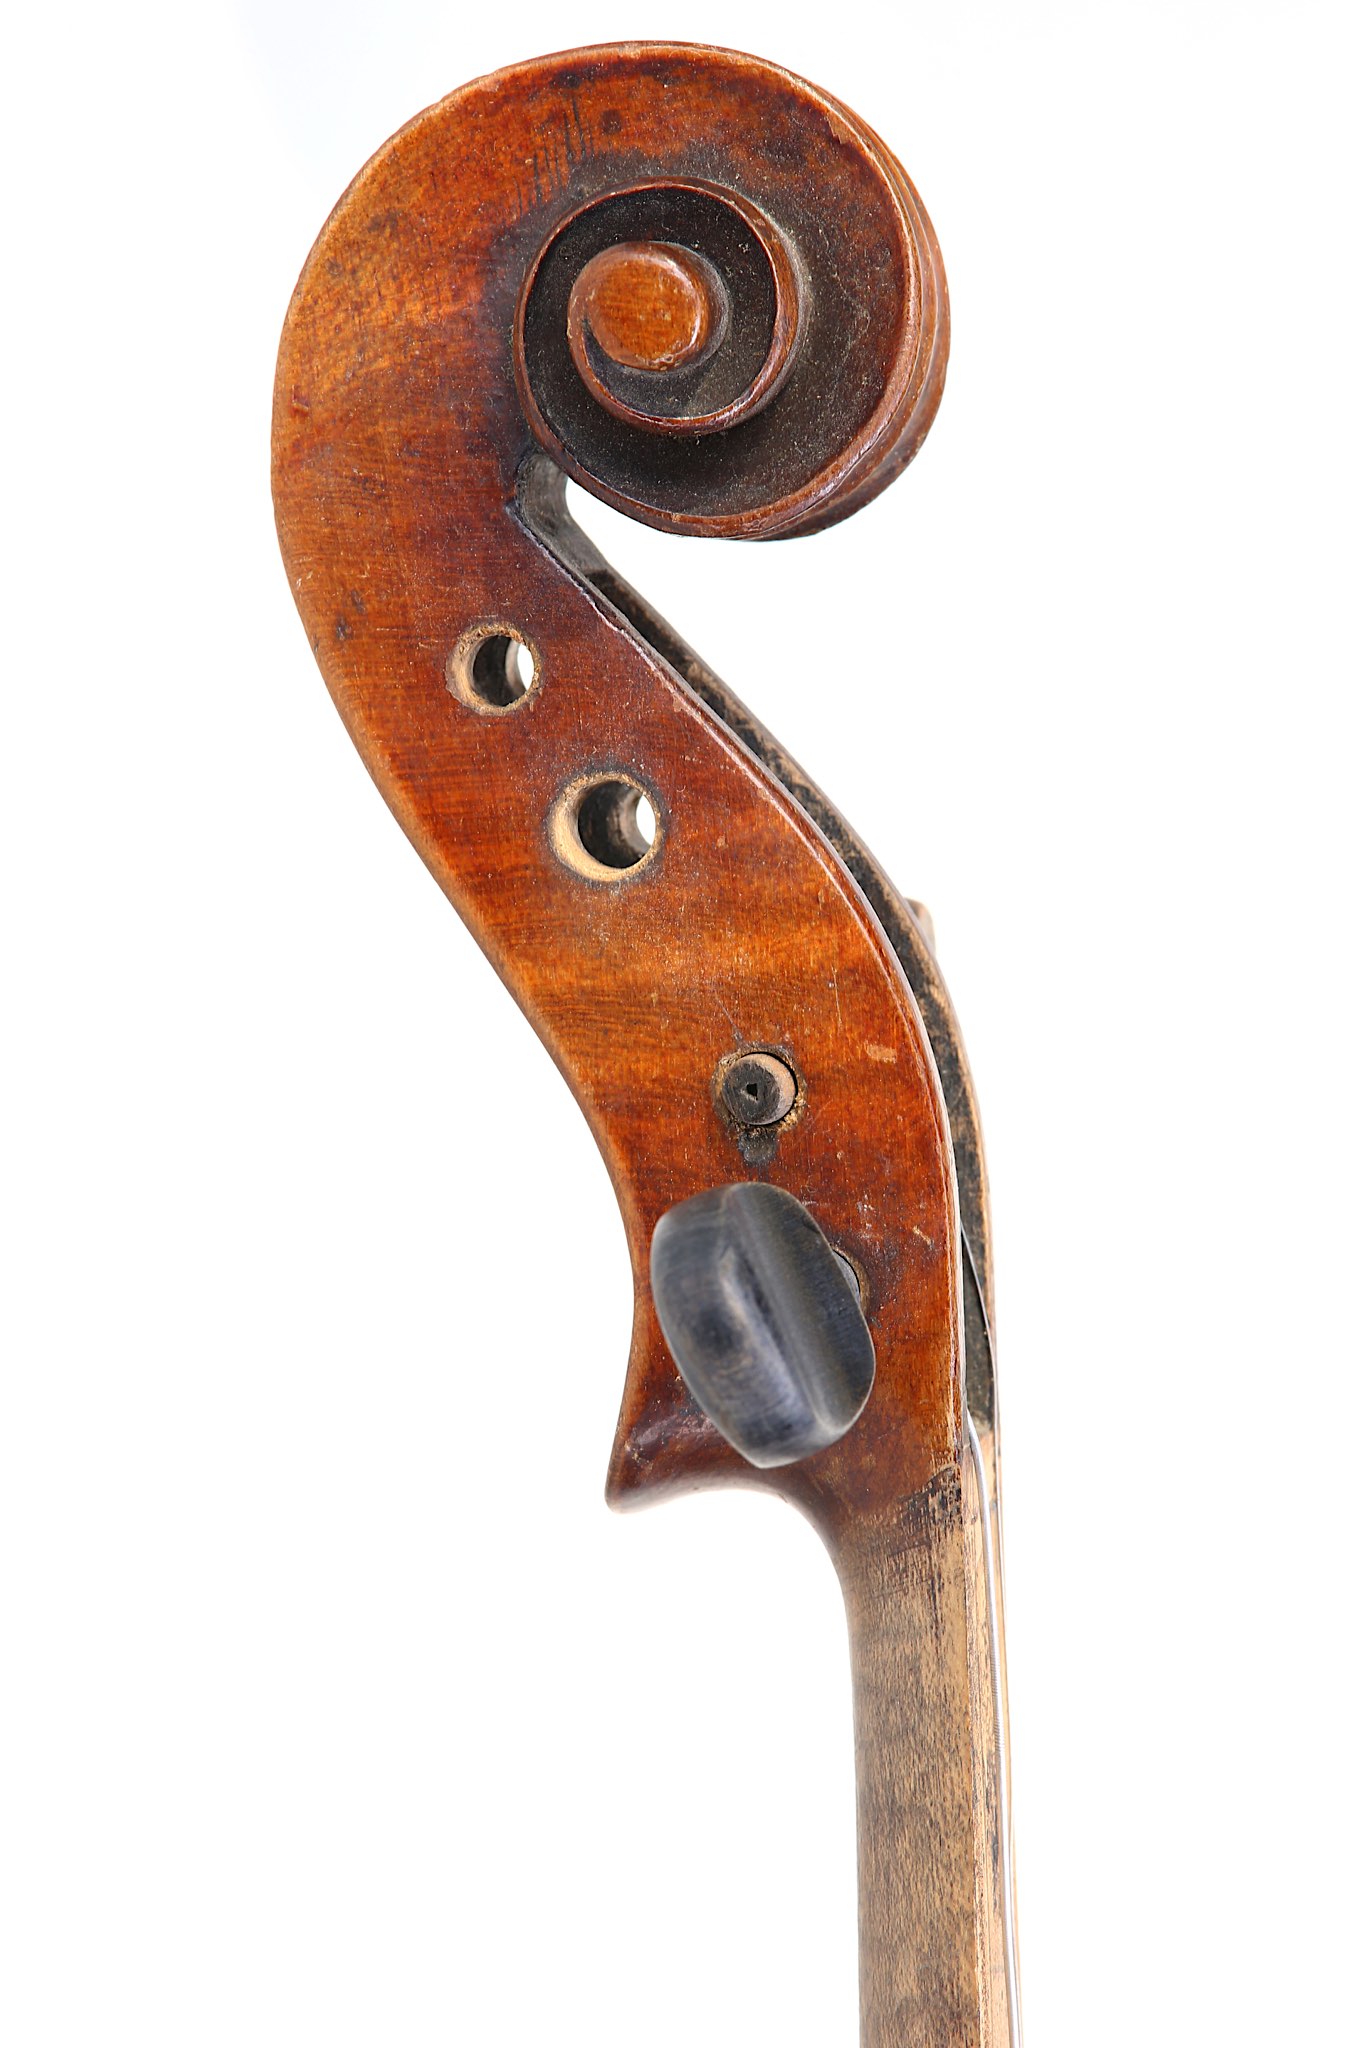 German violin. Early 20th century. No labelled. Two piece back ,medium figure flame maple wood, - Image 7 of 8